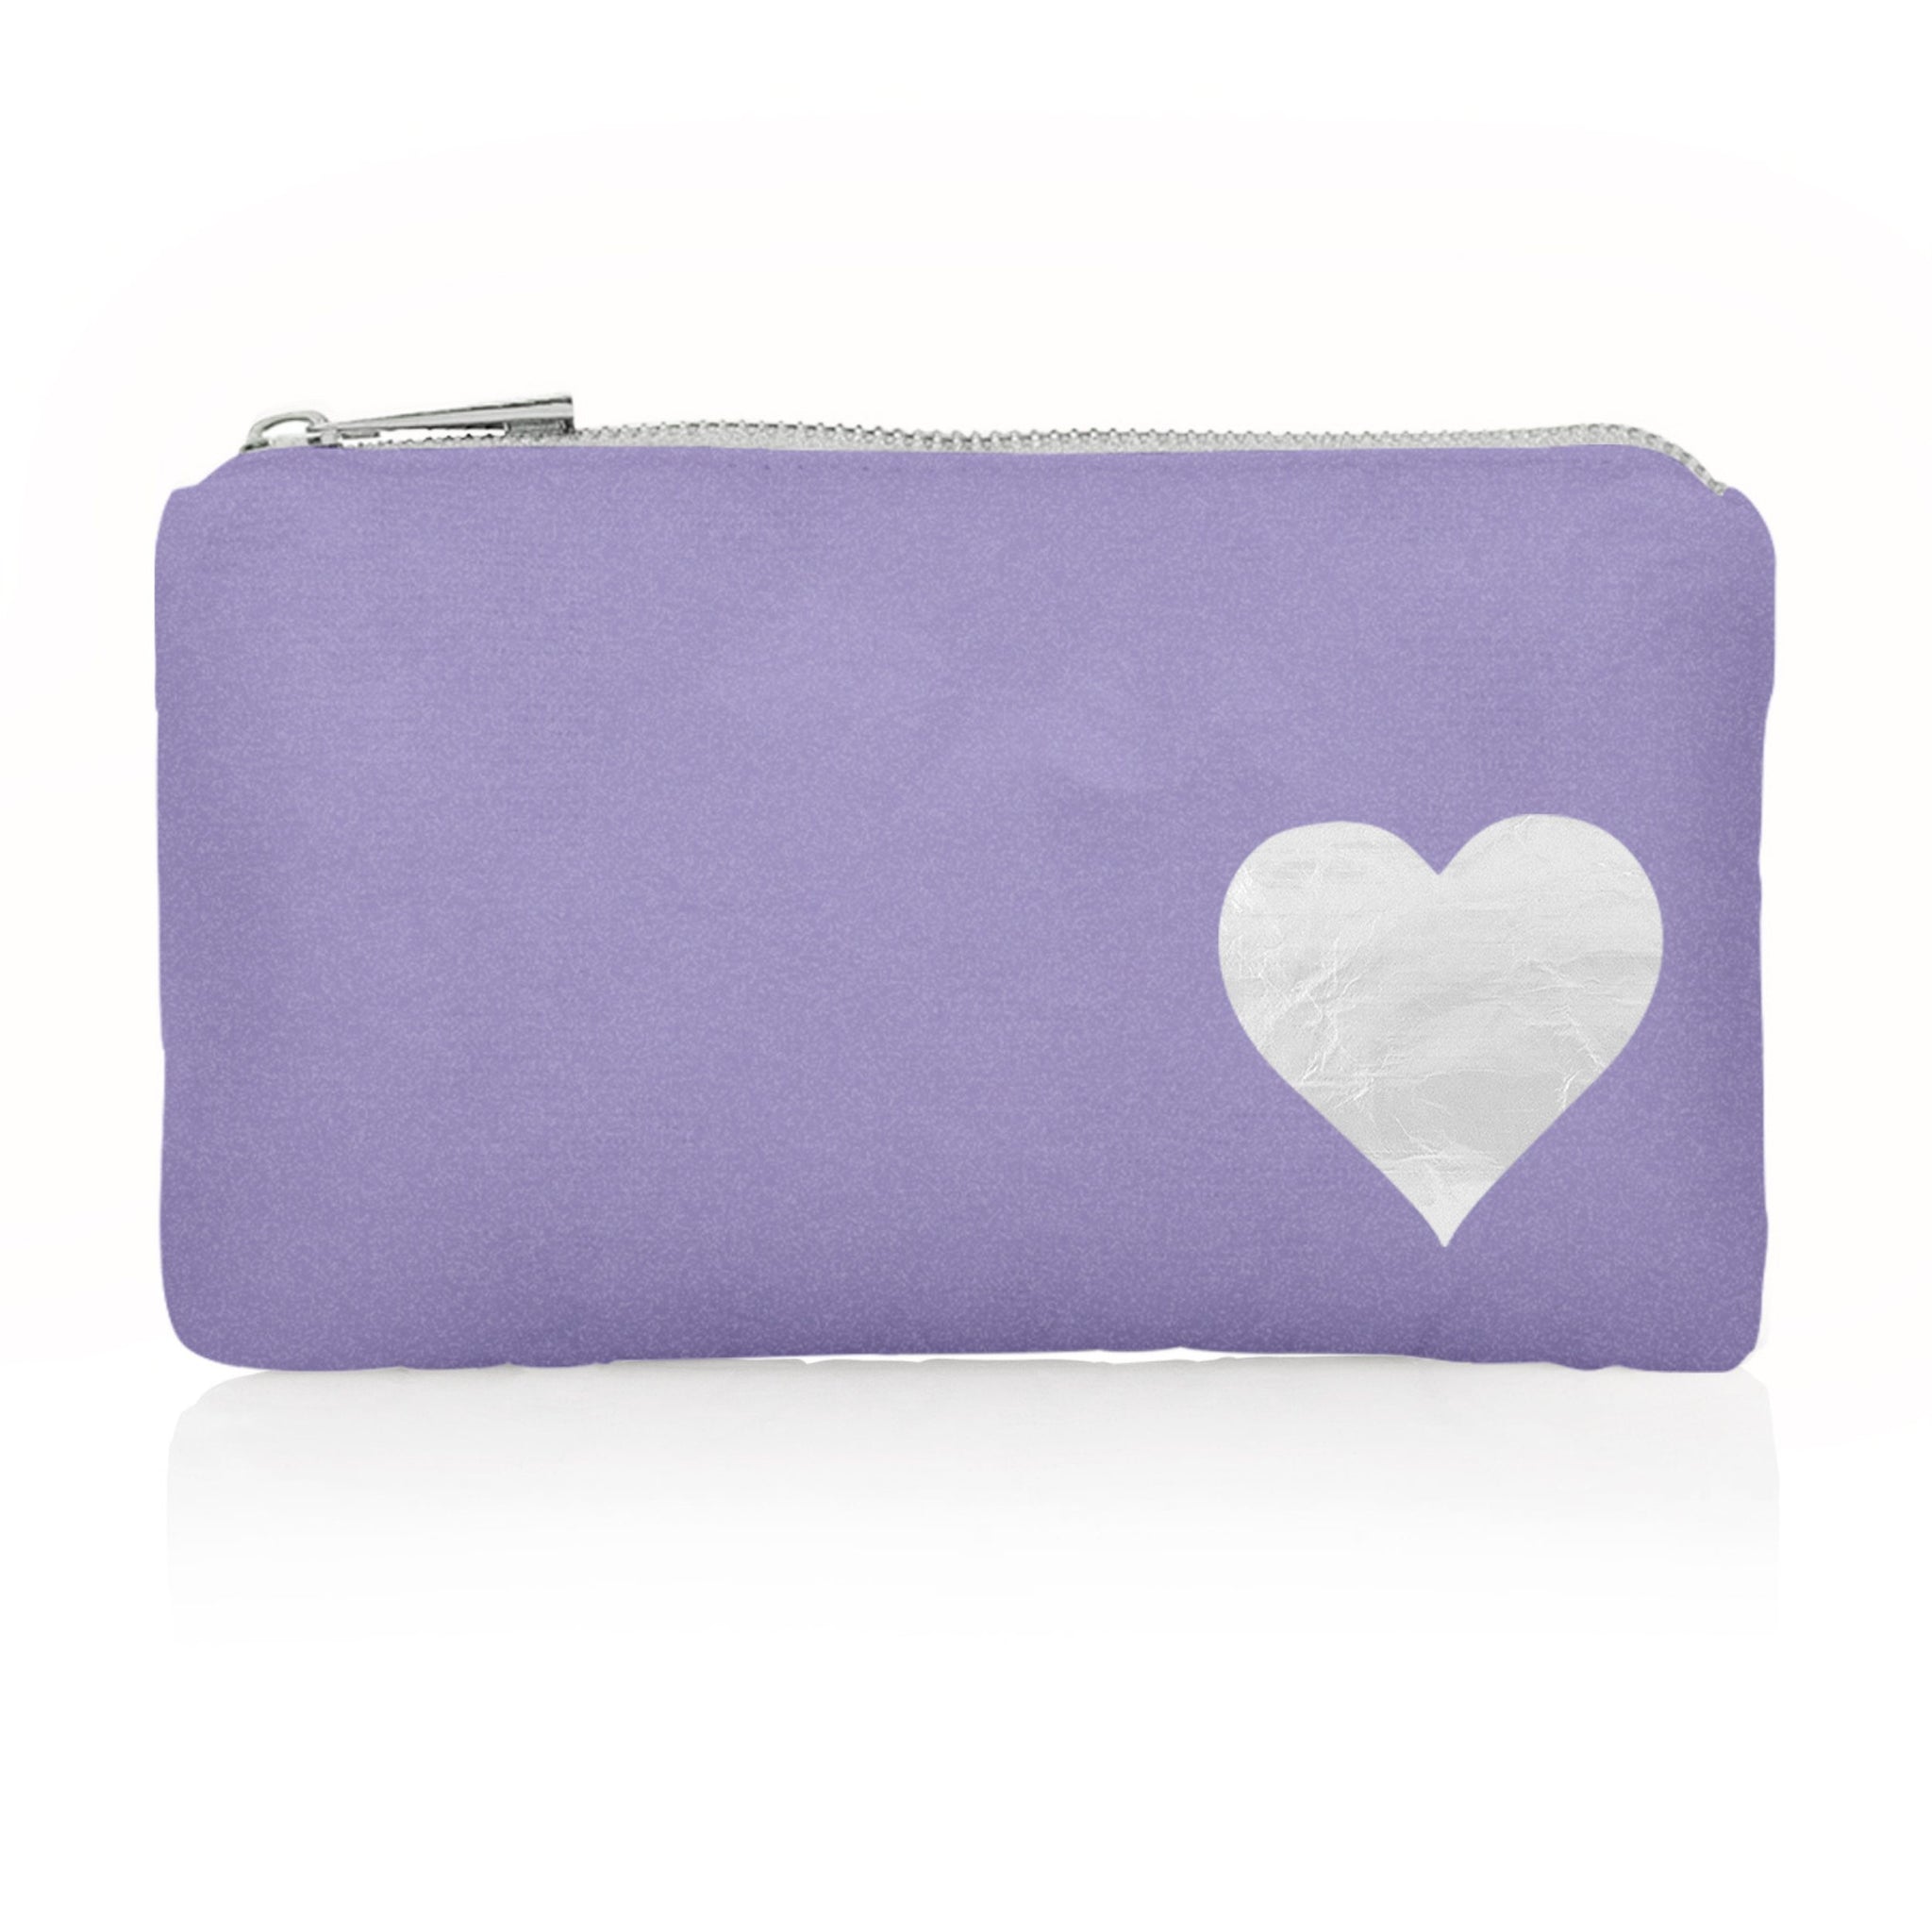 Mini Zipper Pack in Shimmer Purple with Silver Heart